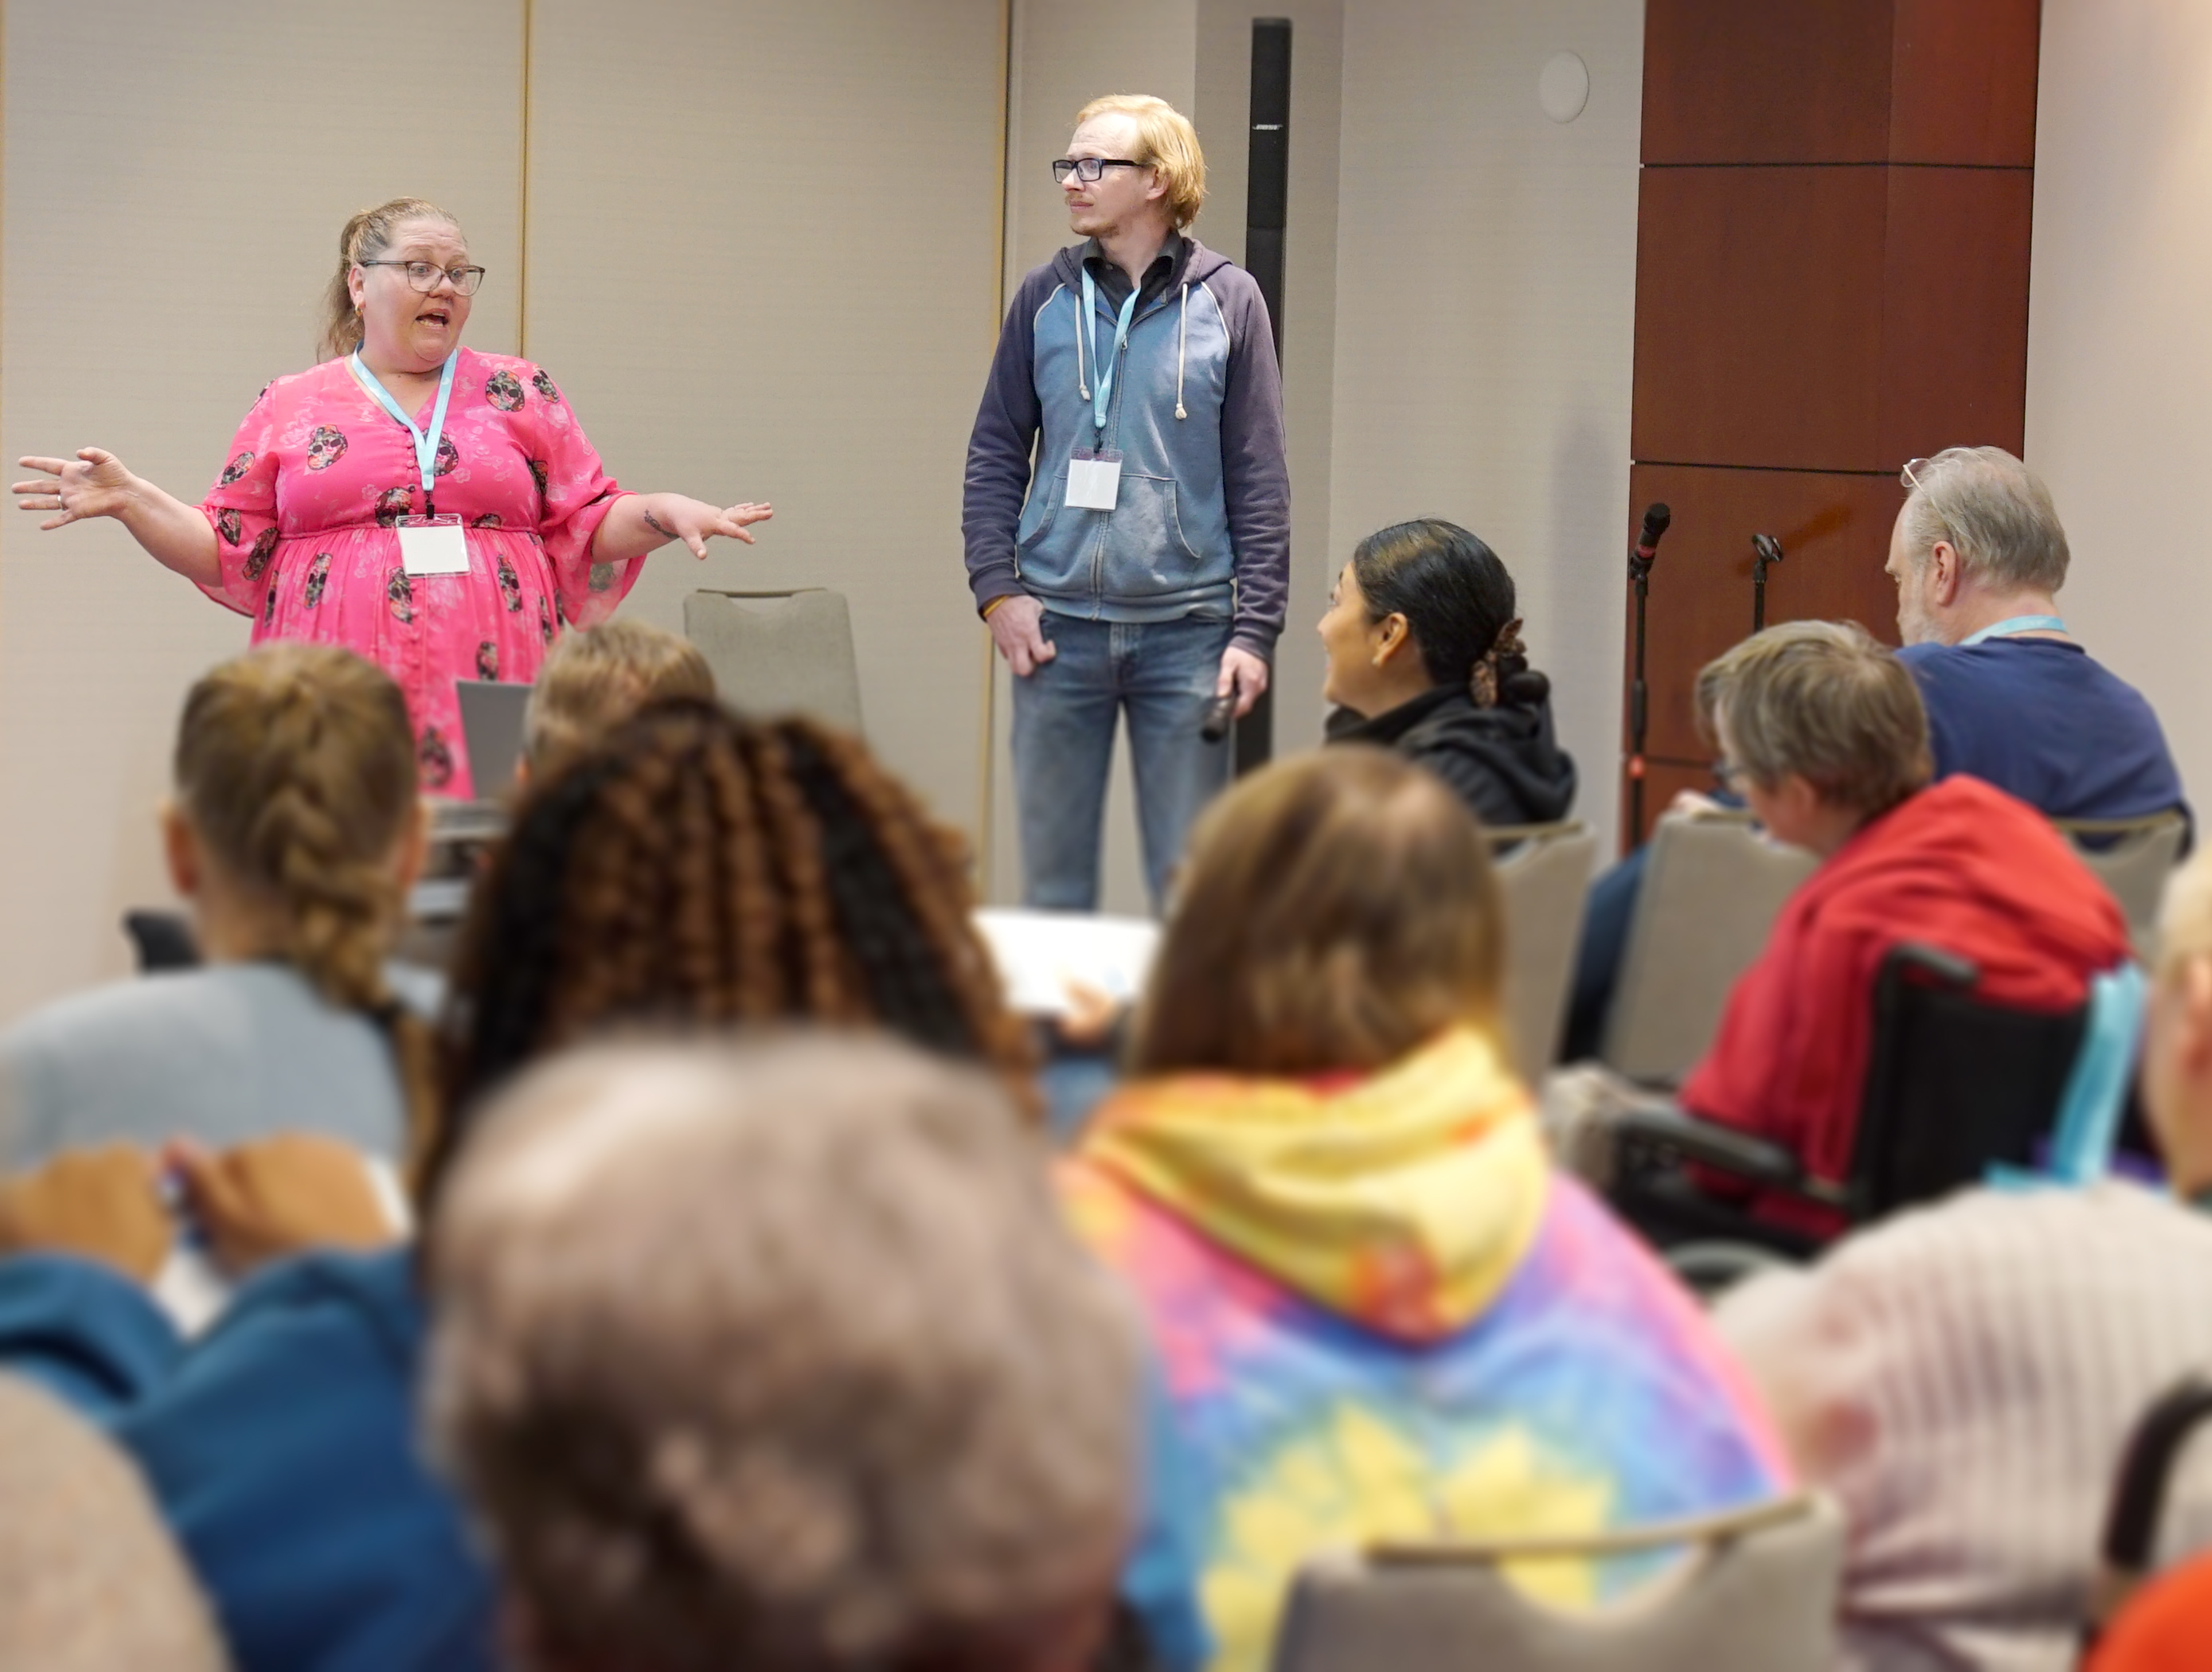 "A woman with blonde hair in a ponytail wearing glasses and a pink dress stands next to a man wearing glasses and a blue sweatshirt while speaking to a crowded audience"